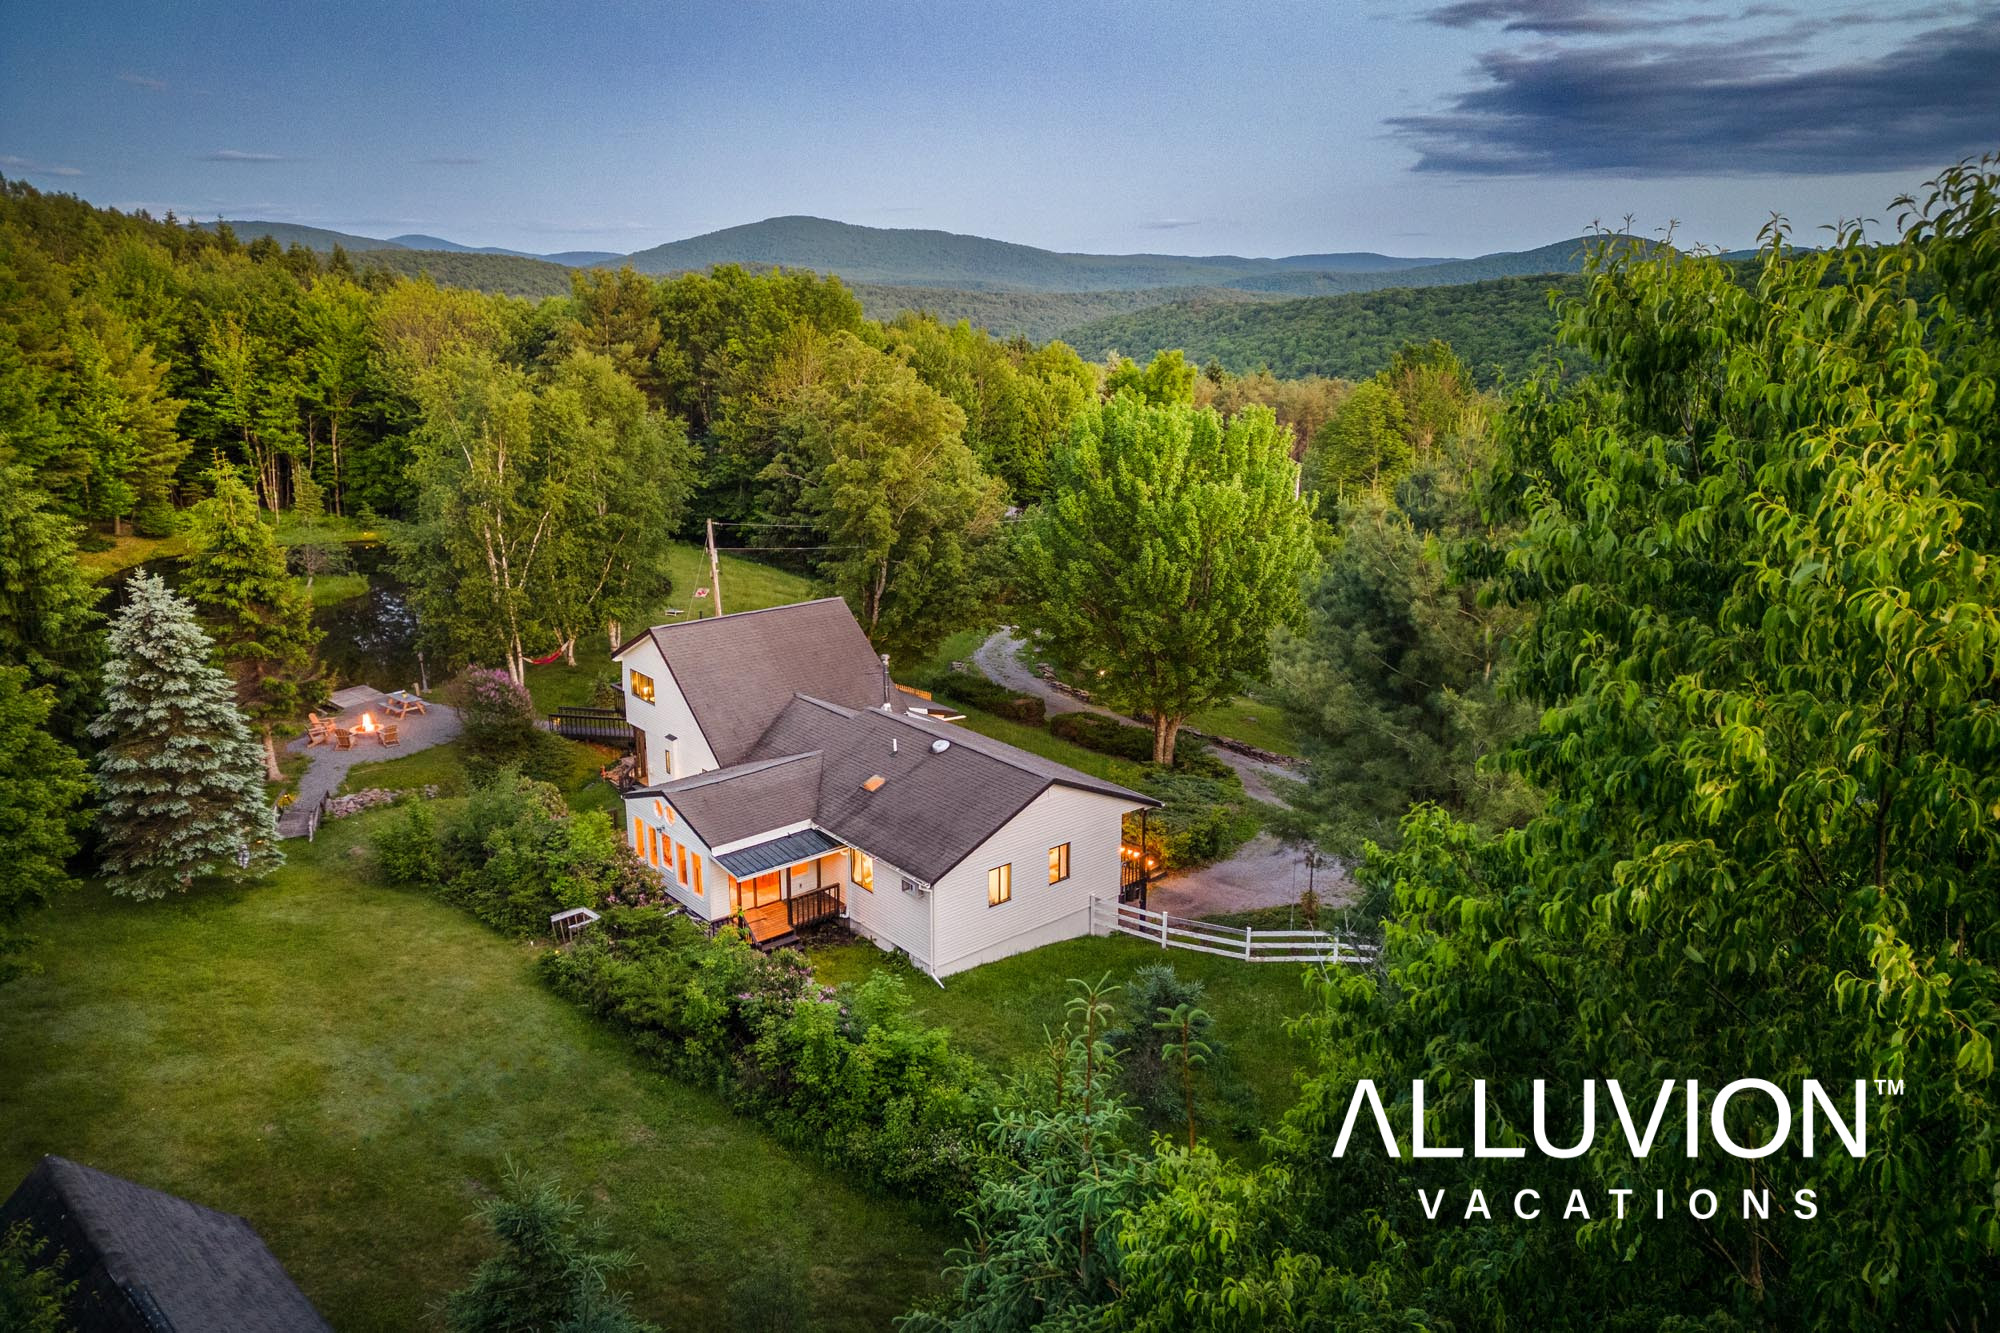 Delhi, NY – Airbnb Farmhouse – Upstate, NY – Alluvion Vacations – The Best Vacation Rentals in the Hudson Valley and Catskills